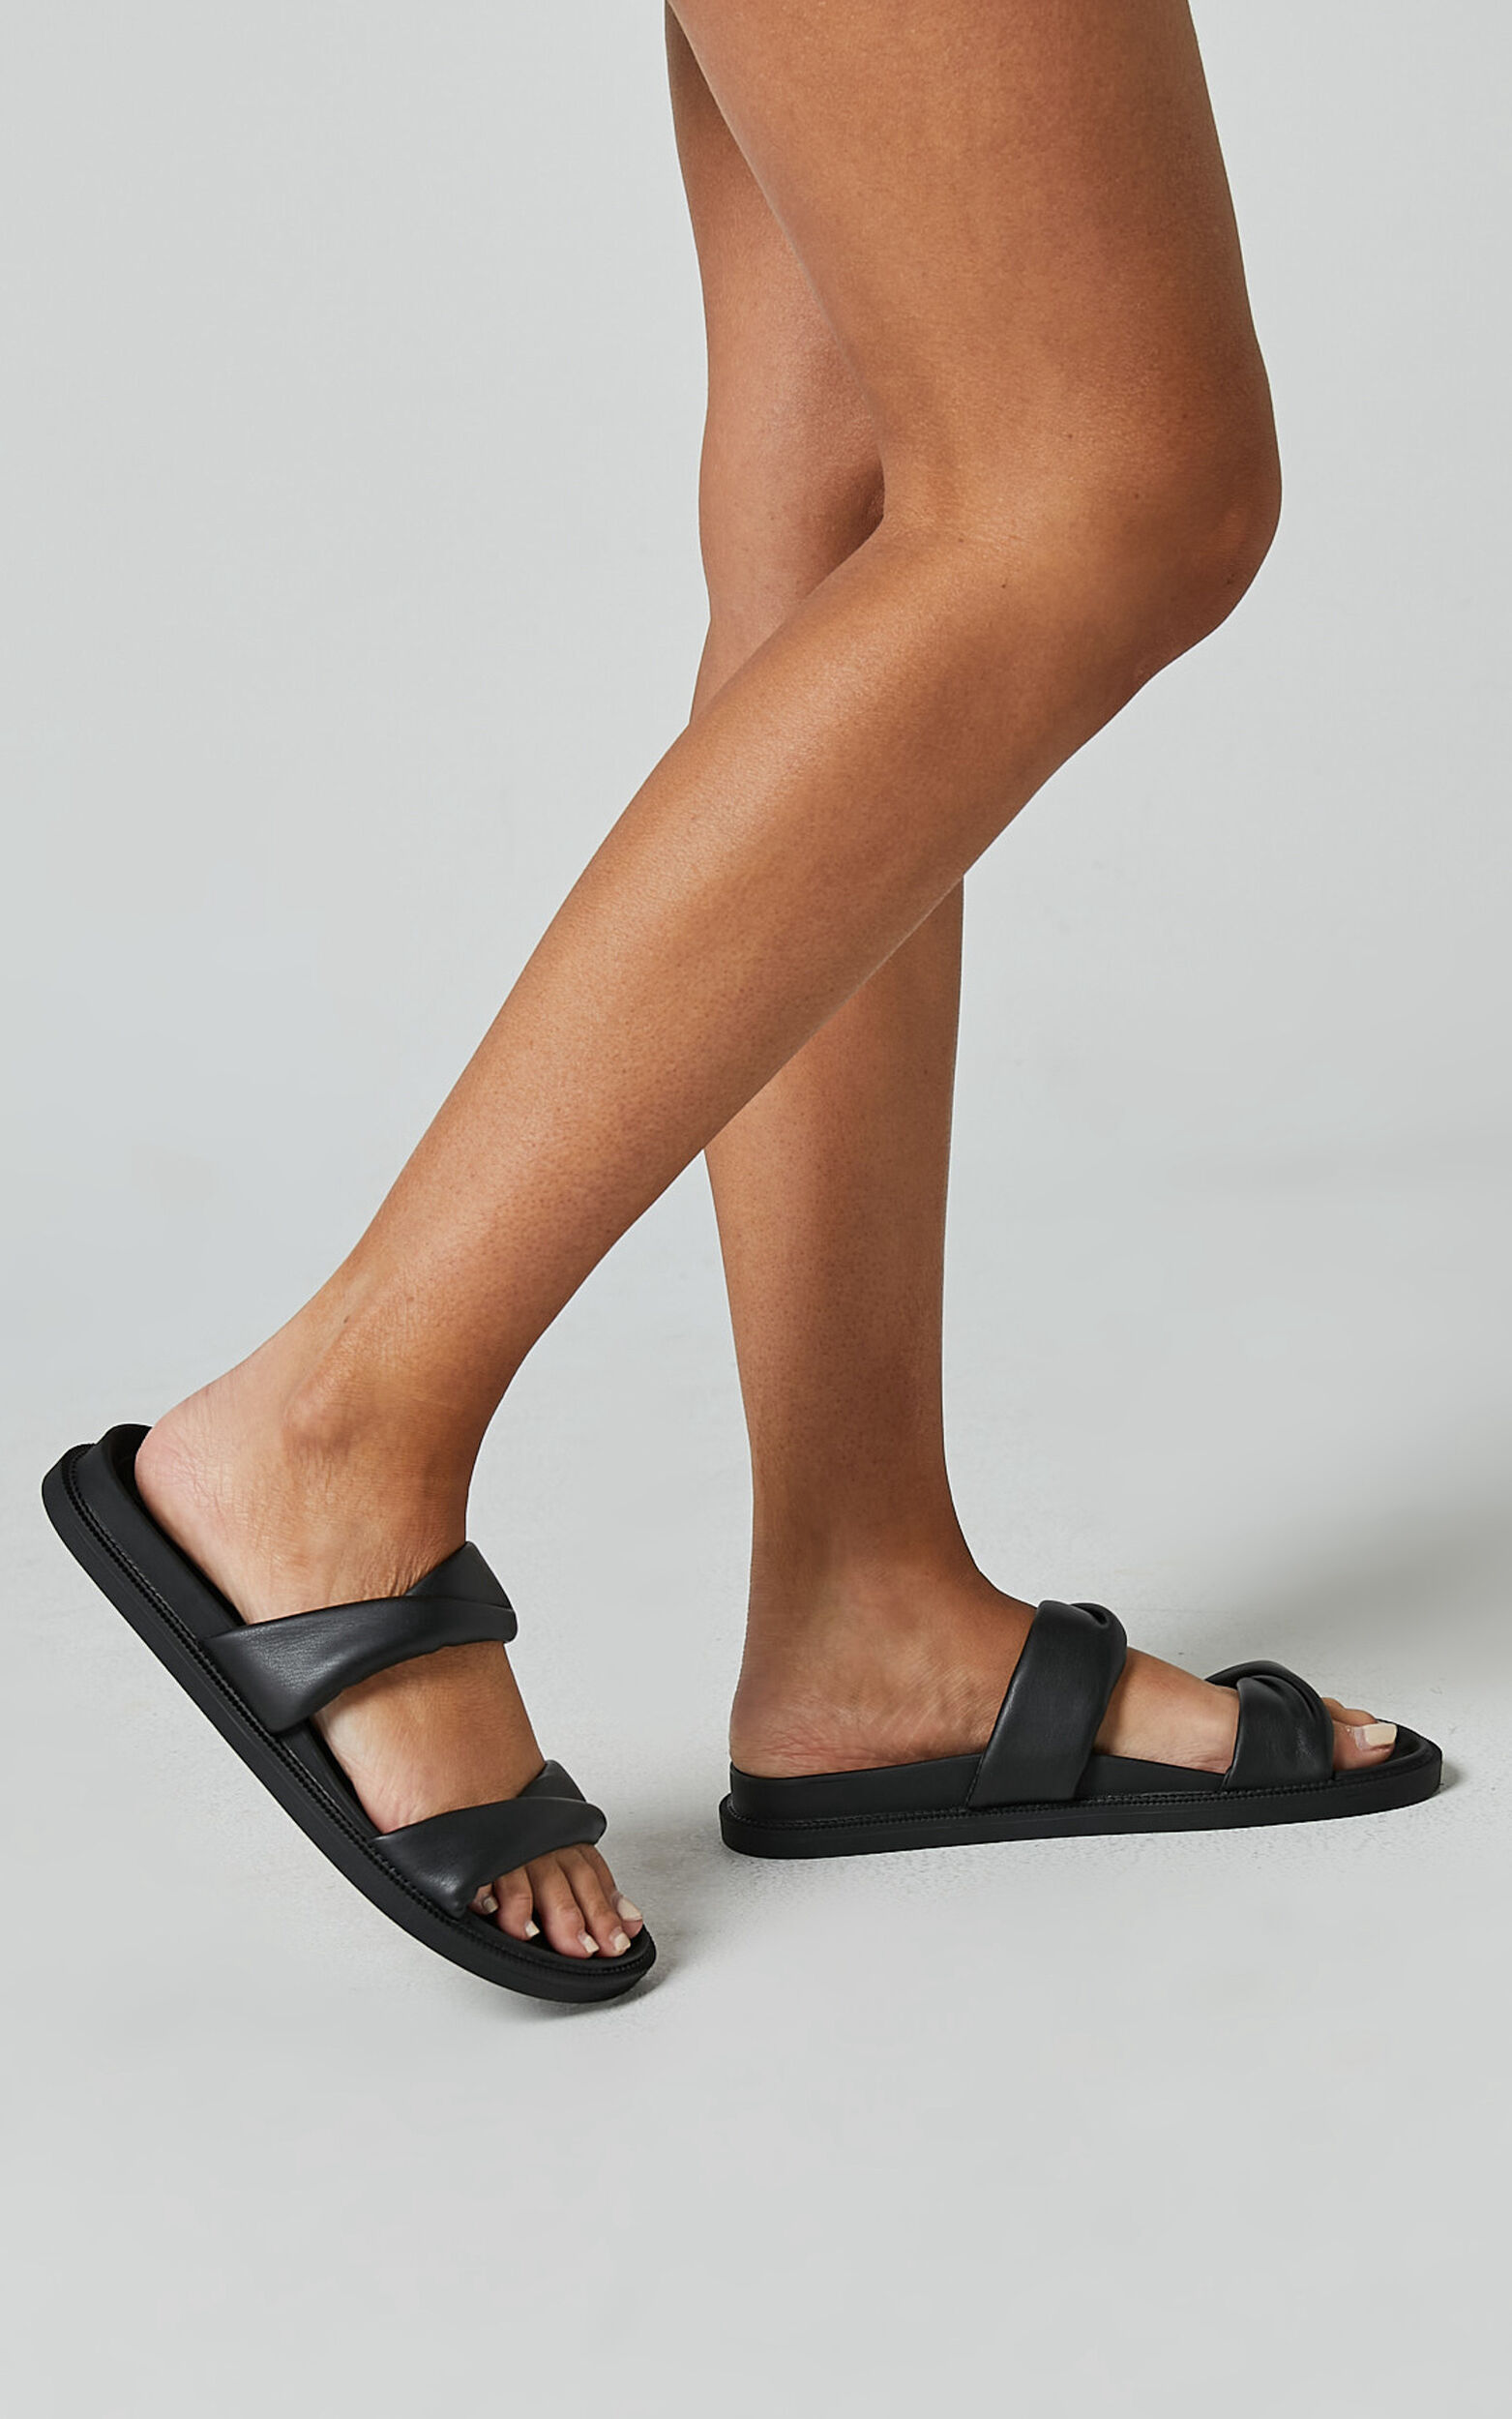 THERAPY - PEELE SLIDES in Black PU - 05, BLK1